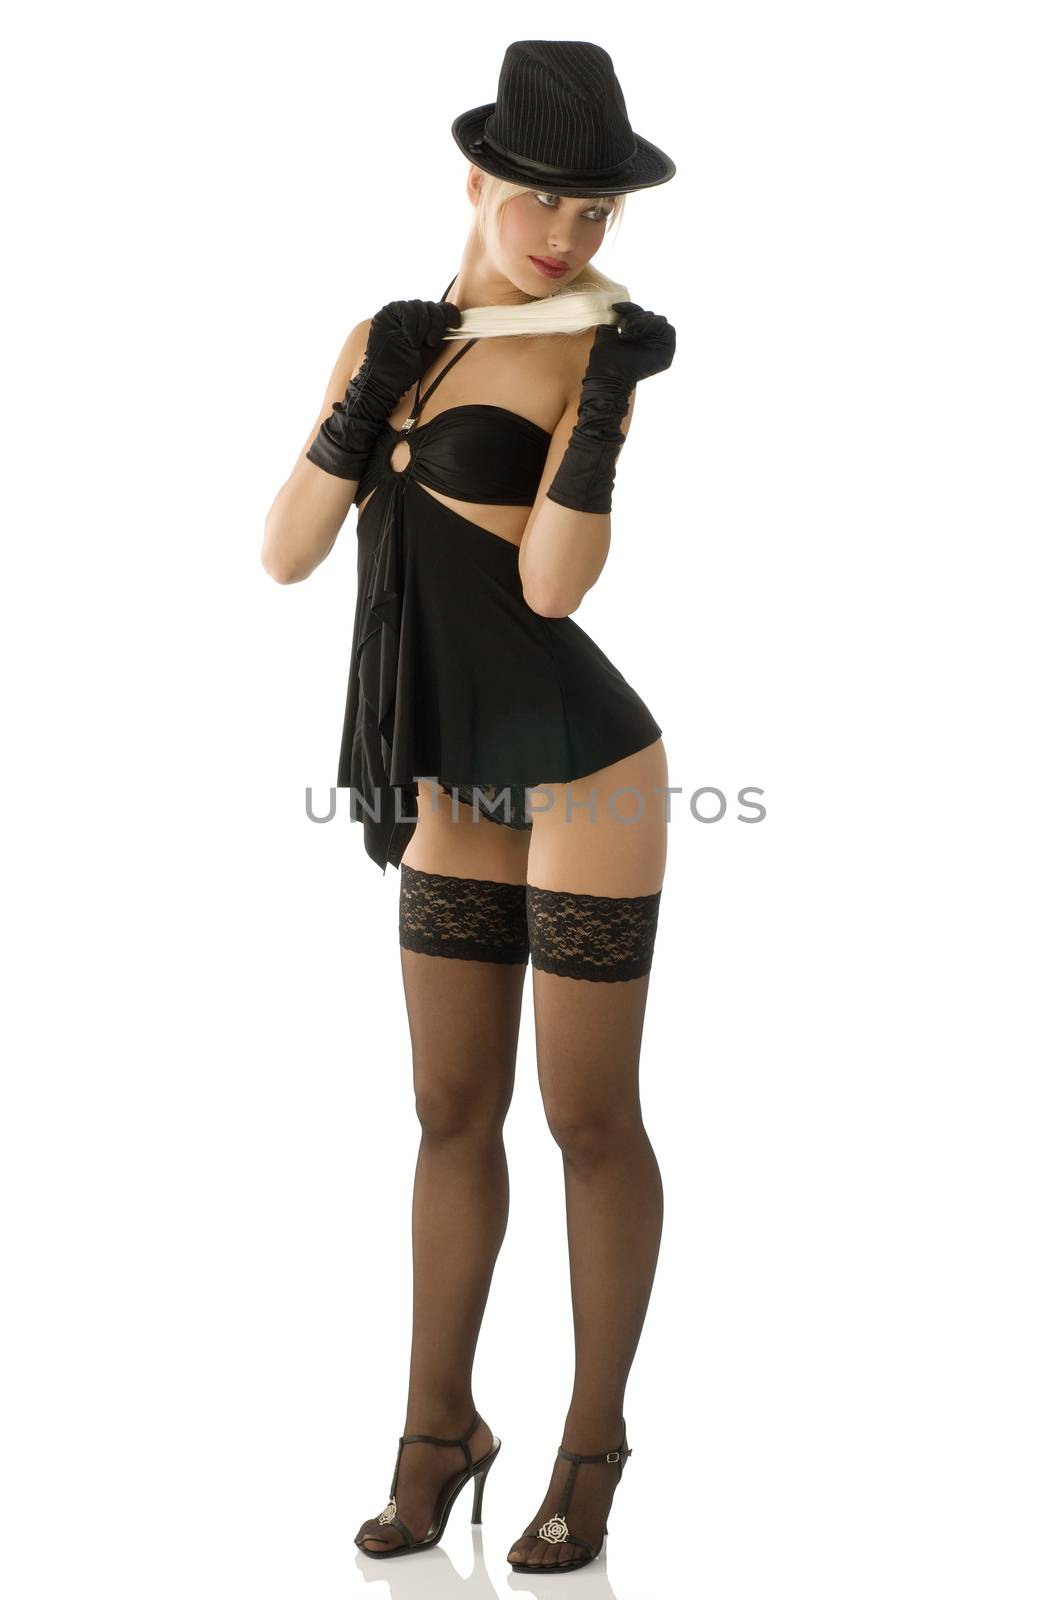 sexy pinup girl in black with hat stocking and shoes with heel